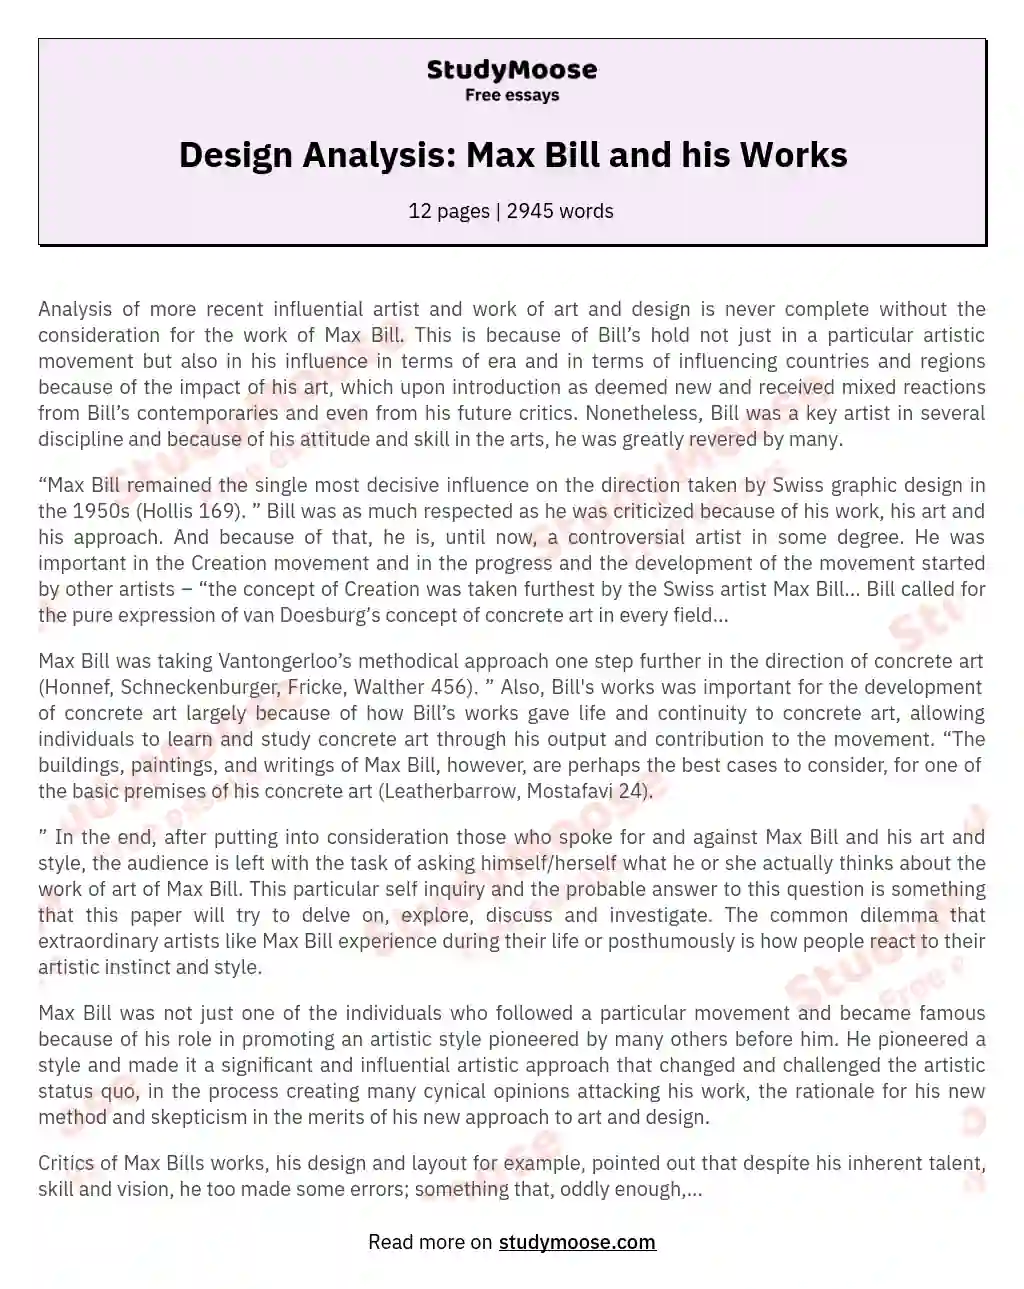 Design Analysis: Max Bill and his Works essay